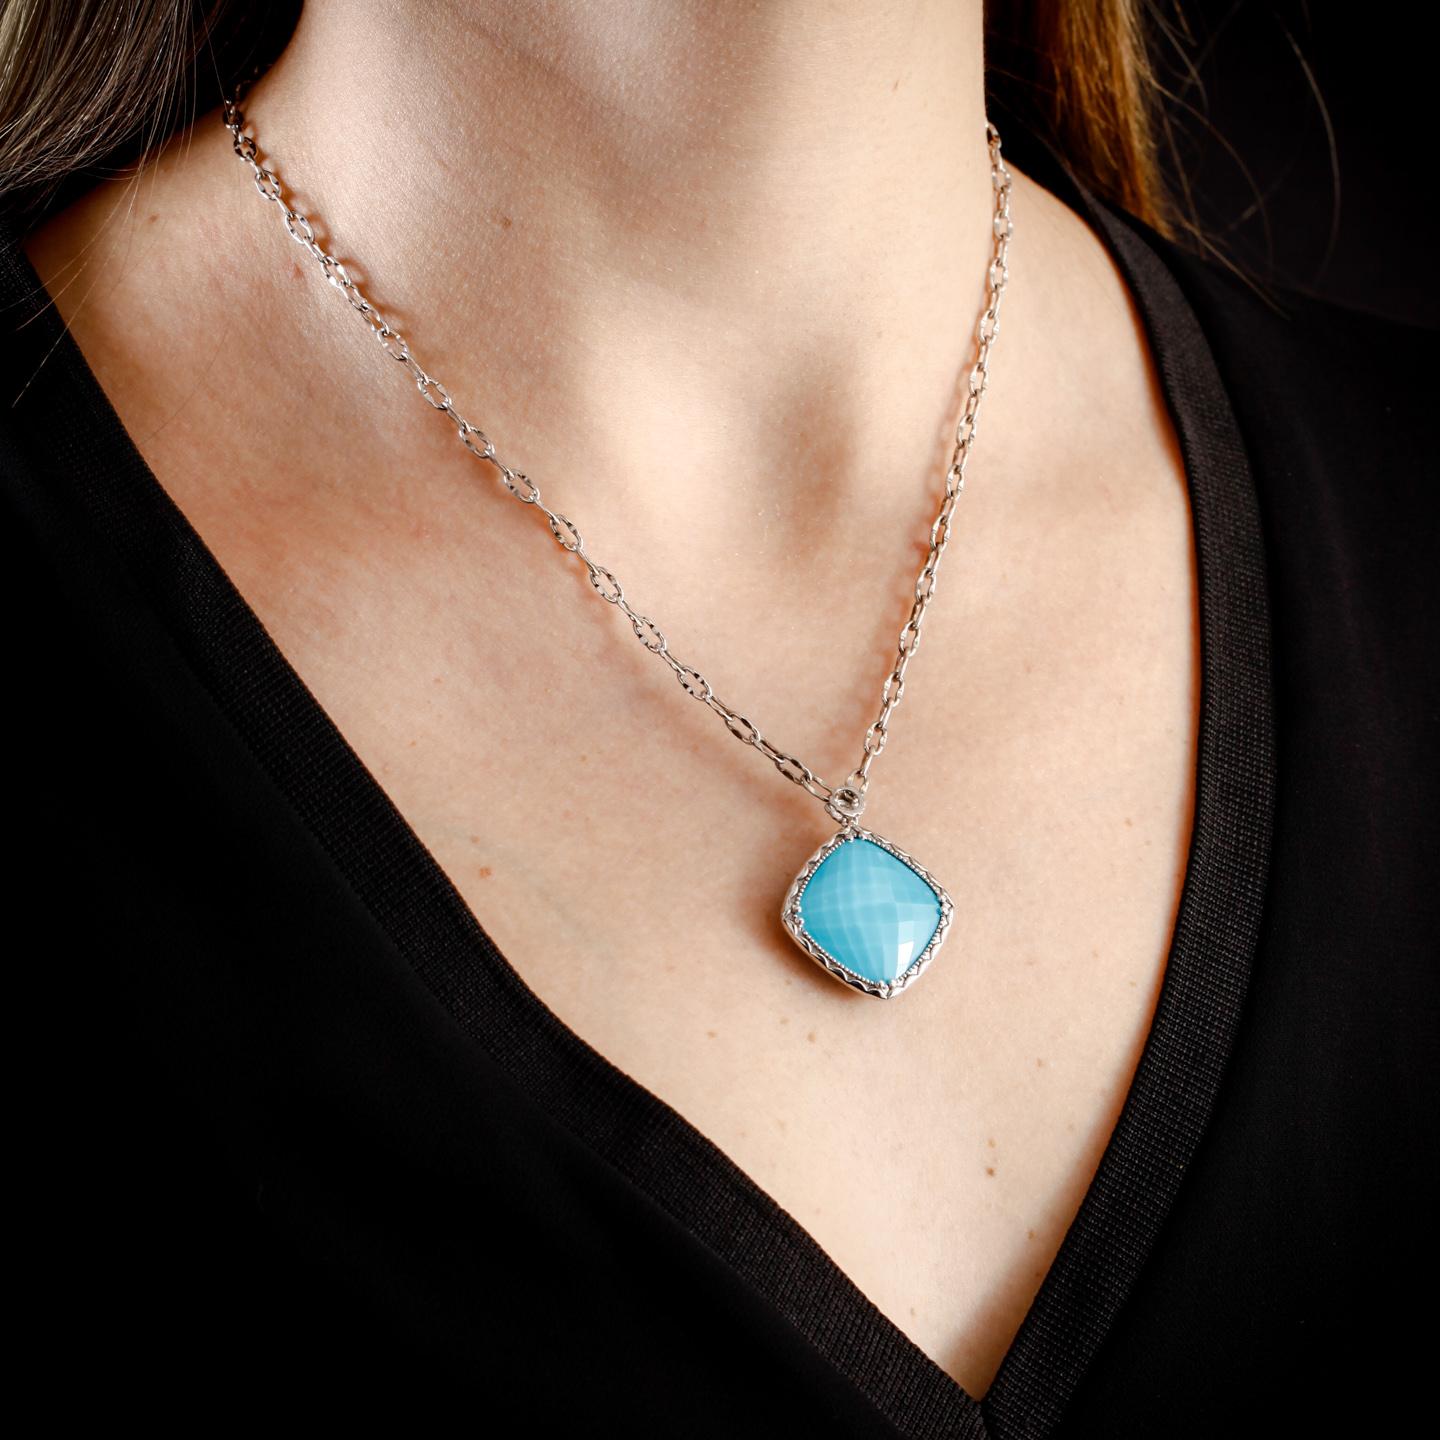 This Tacori Silver necklace is set with a 20x20mm cushion-shaped pendant of turquoise and clear quartz surrounded by silver. The Tacori stamp featured on the bale is 18k yellow gold. The silver Tacori chain is 18 inches long. This necklace is in